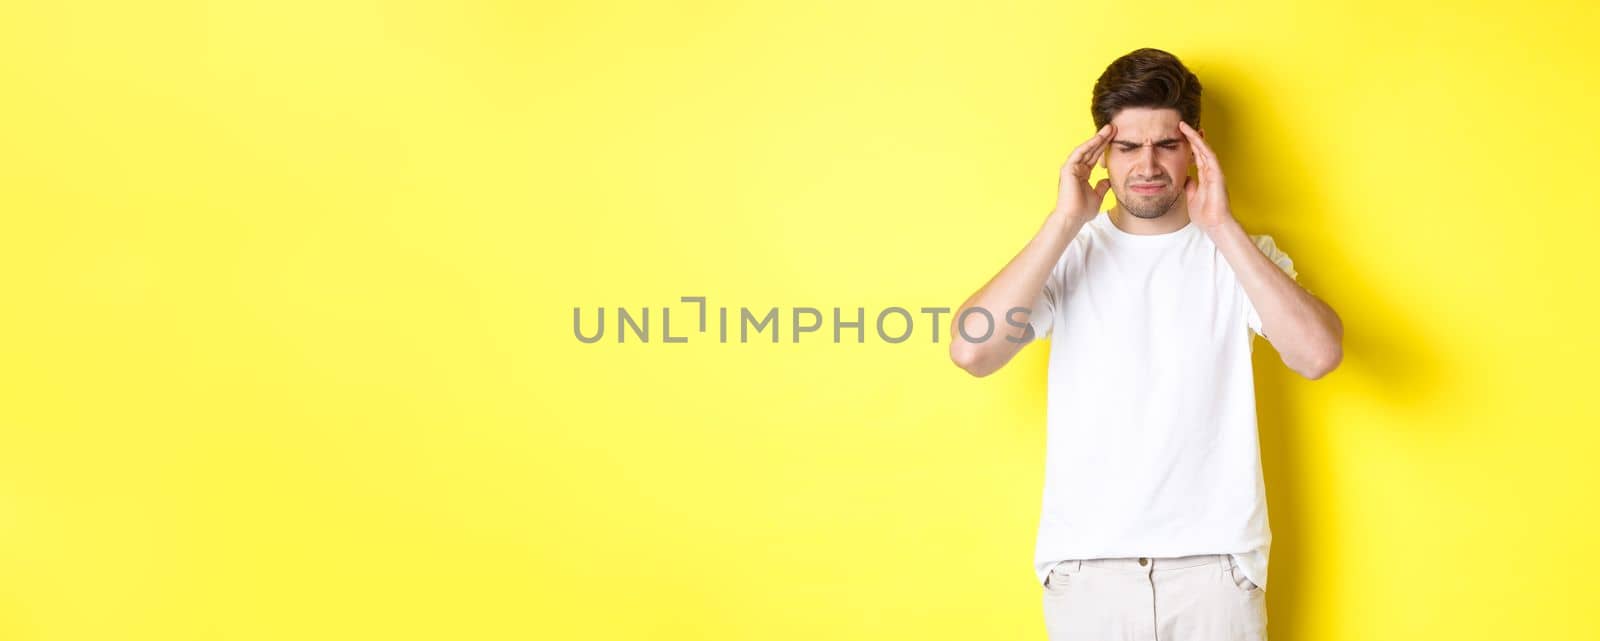 Troubled man touching head and grimacing from pain, complaining on headache, standing over yellow background. Copy space